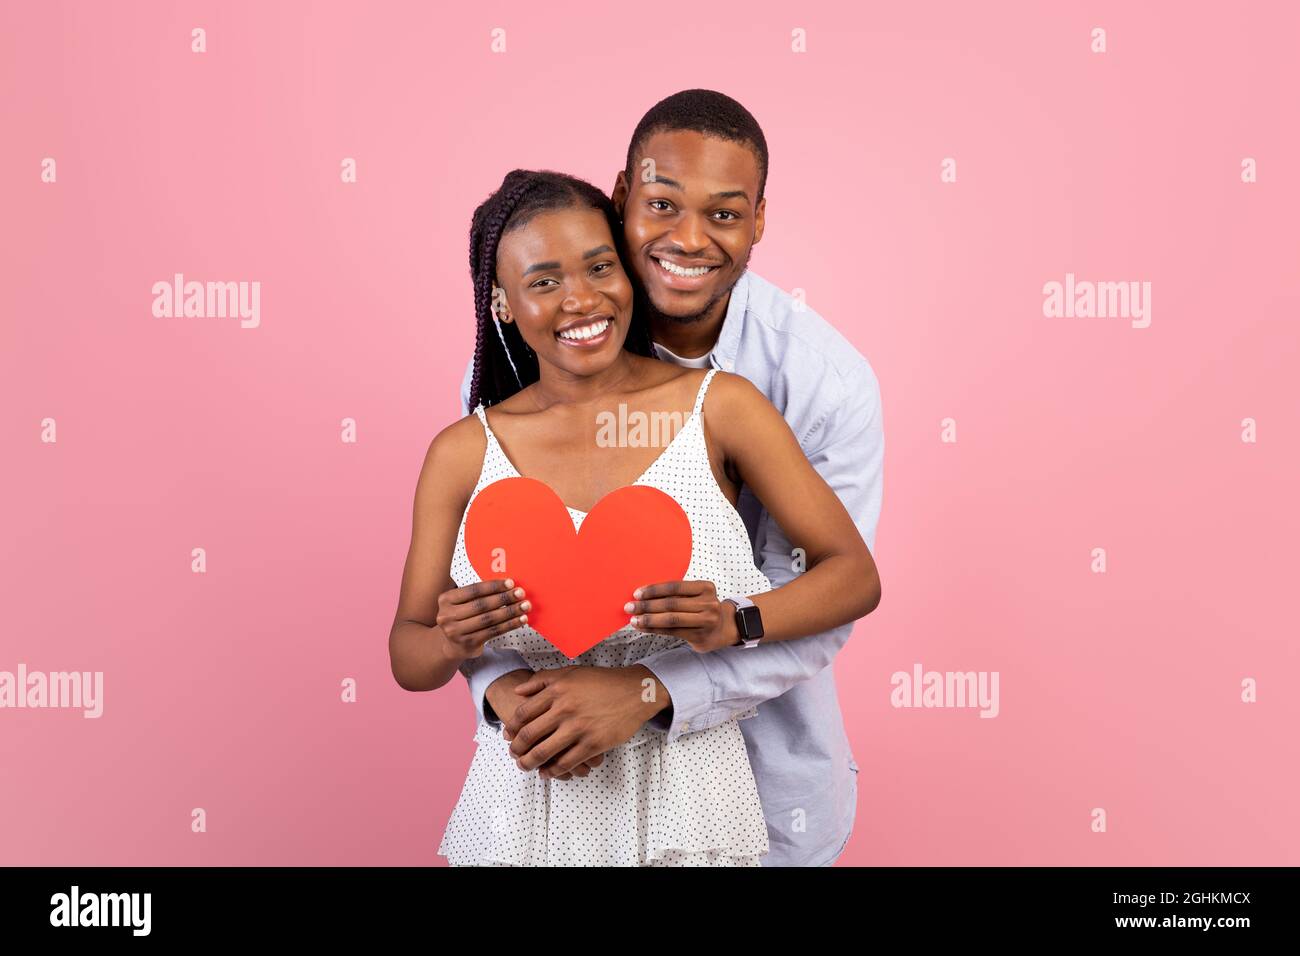 Loving Young Black Couple Embracing in Bed Stock Photo - Image of